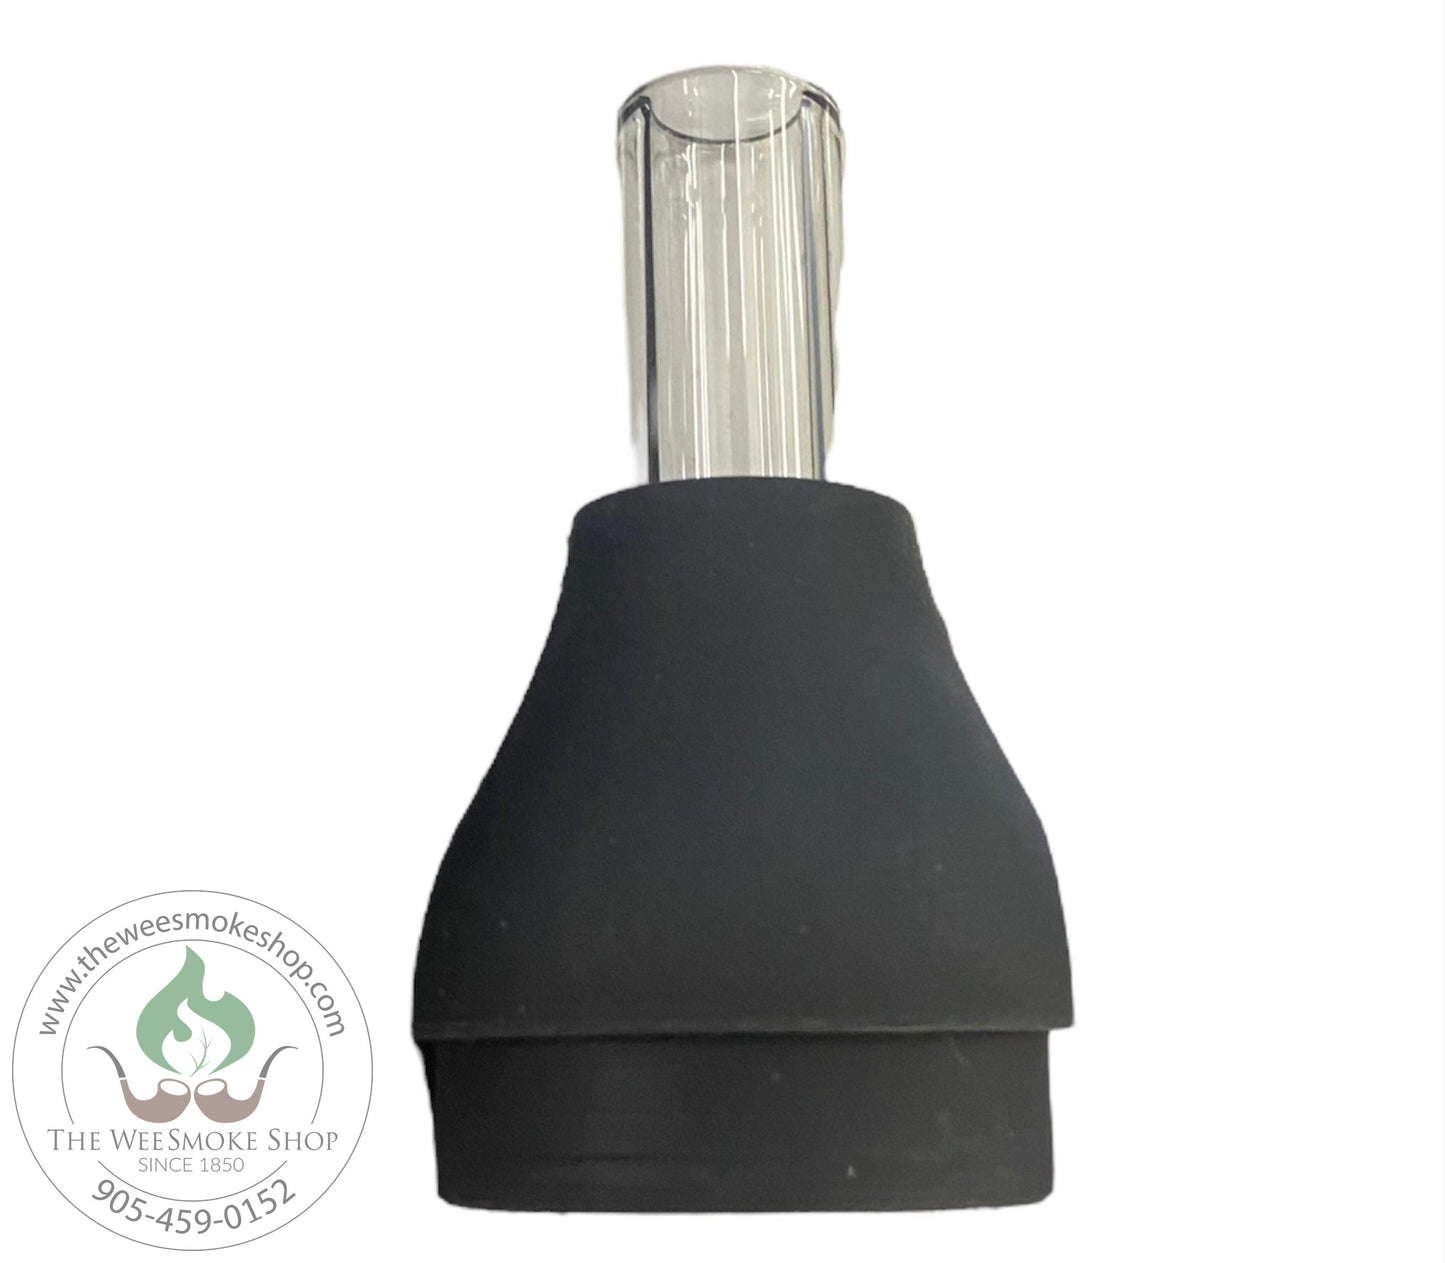 Reign 3 Kings Glass Mouthpiece